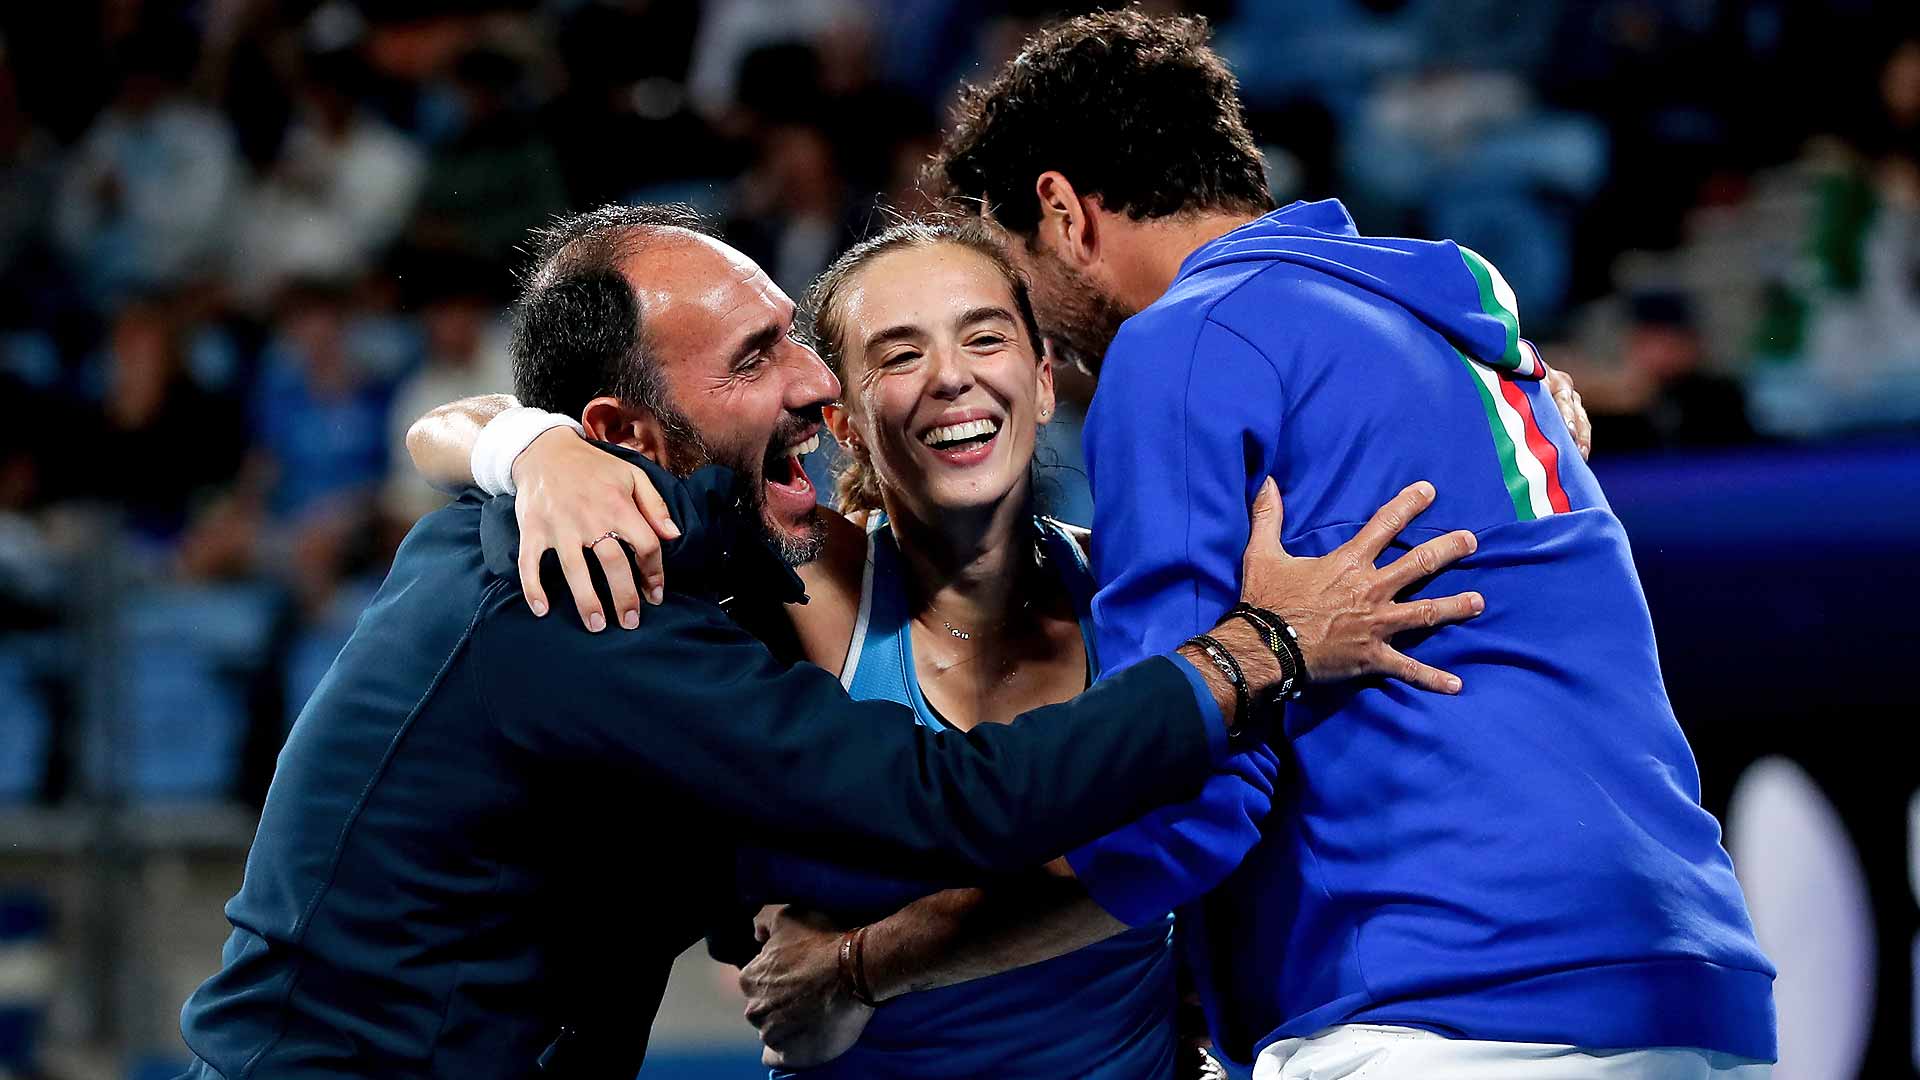 Captain Vincenzo Santopadre, Lucia Bronzetti and Matteo Berrettini celebrate Team Italy's victory over Team Greece in the United Cup Final Four.